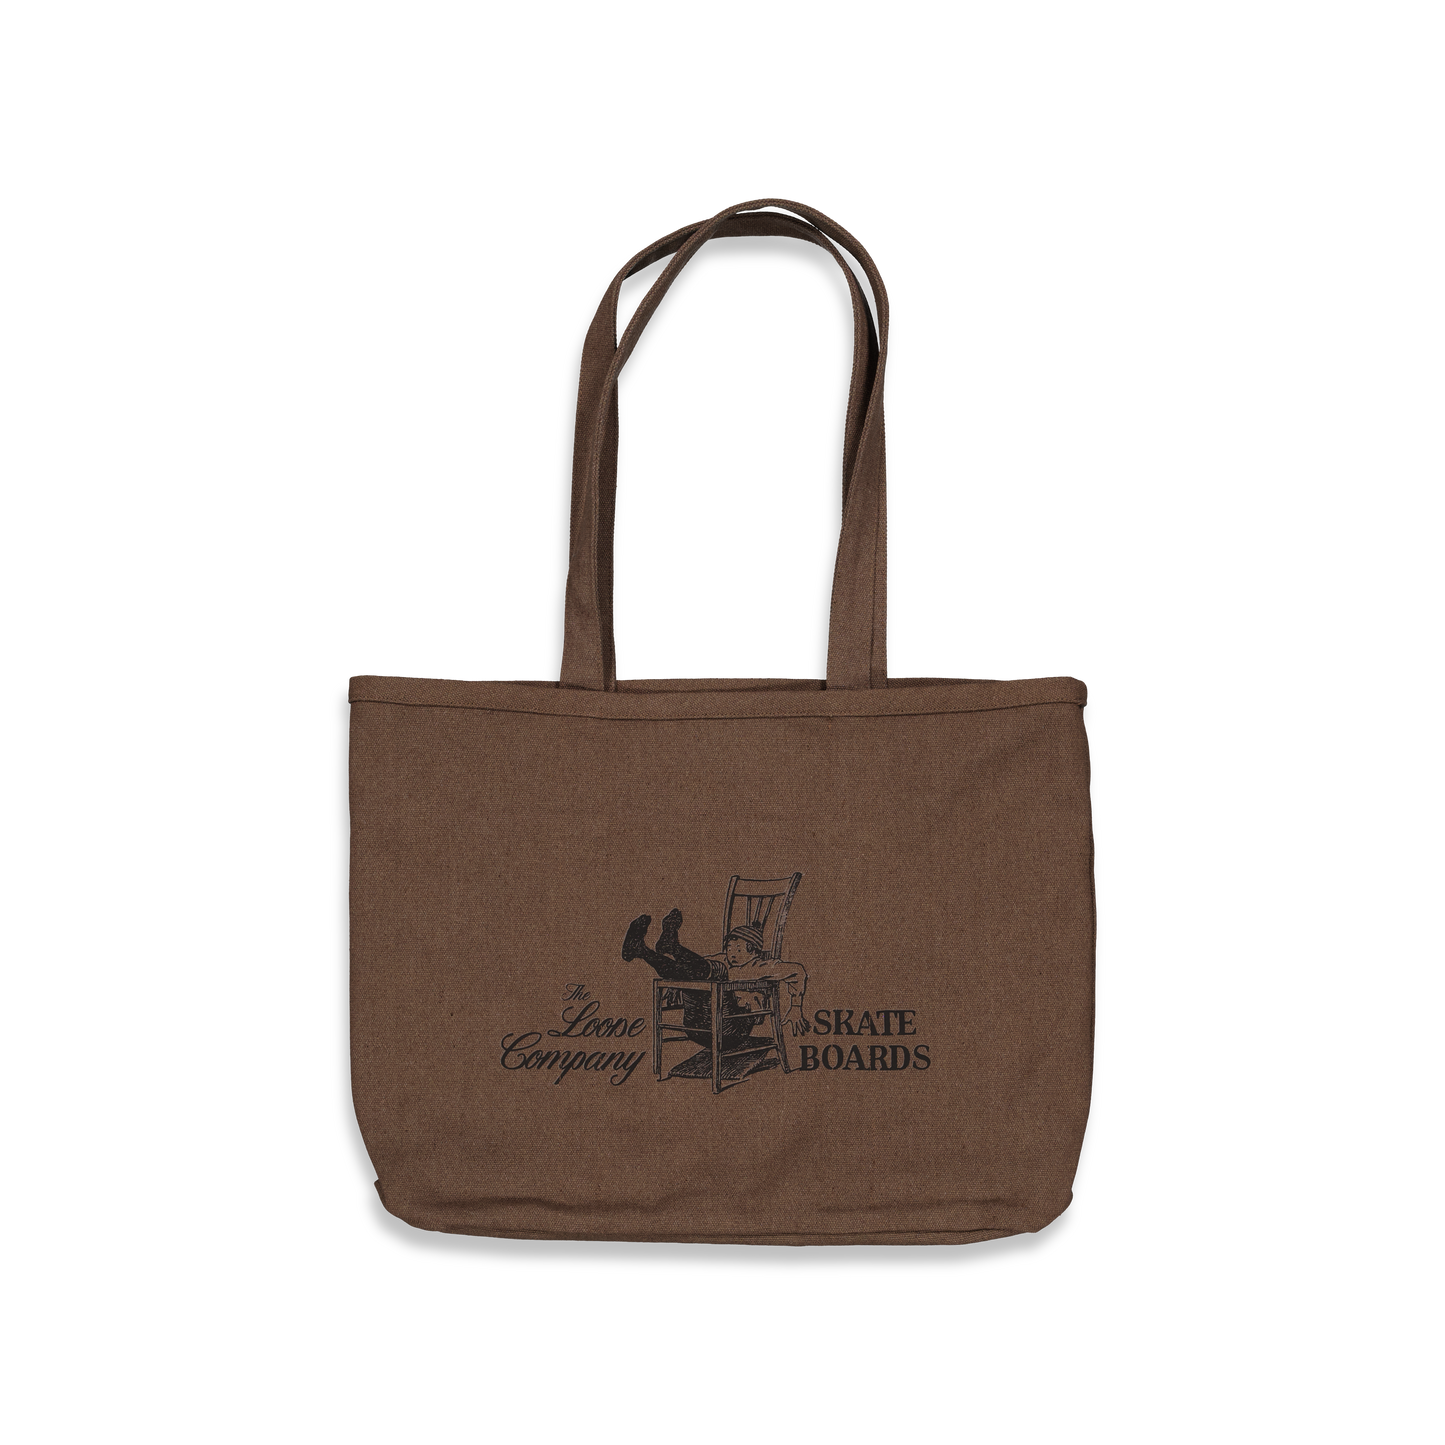 The Loose Company Chair Tote Bag